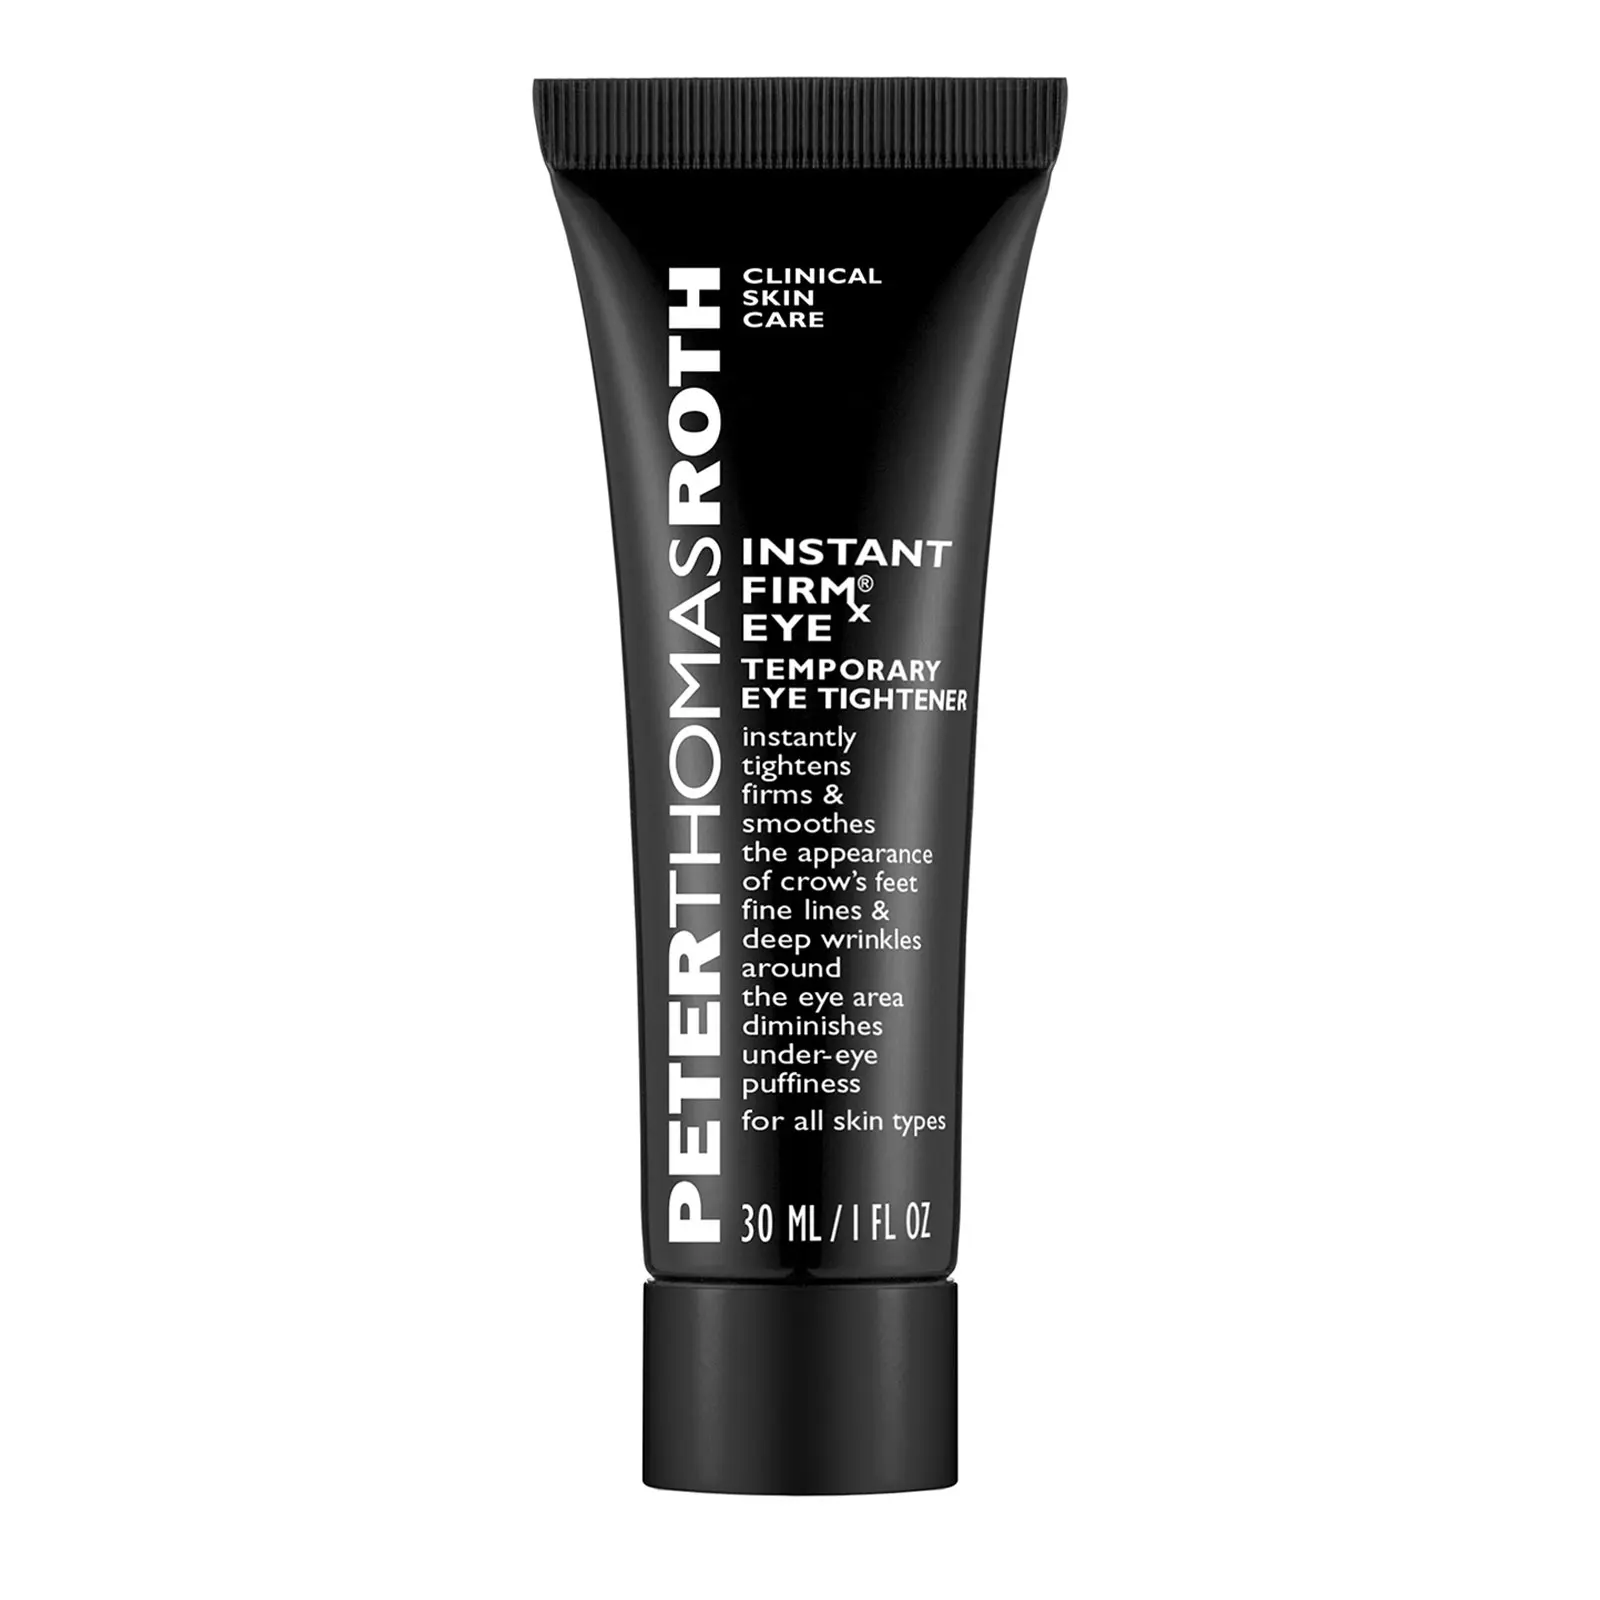 Peter Thomas Roth Instant FIRMx® Eye 30ml Discounts and Cashback